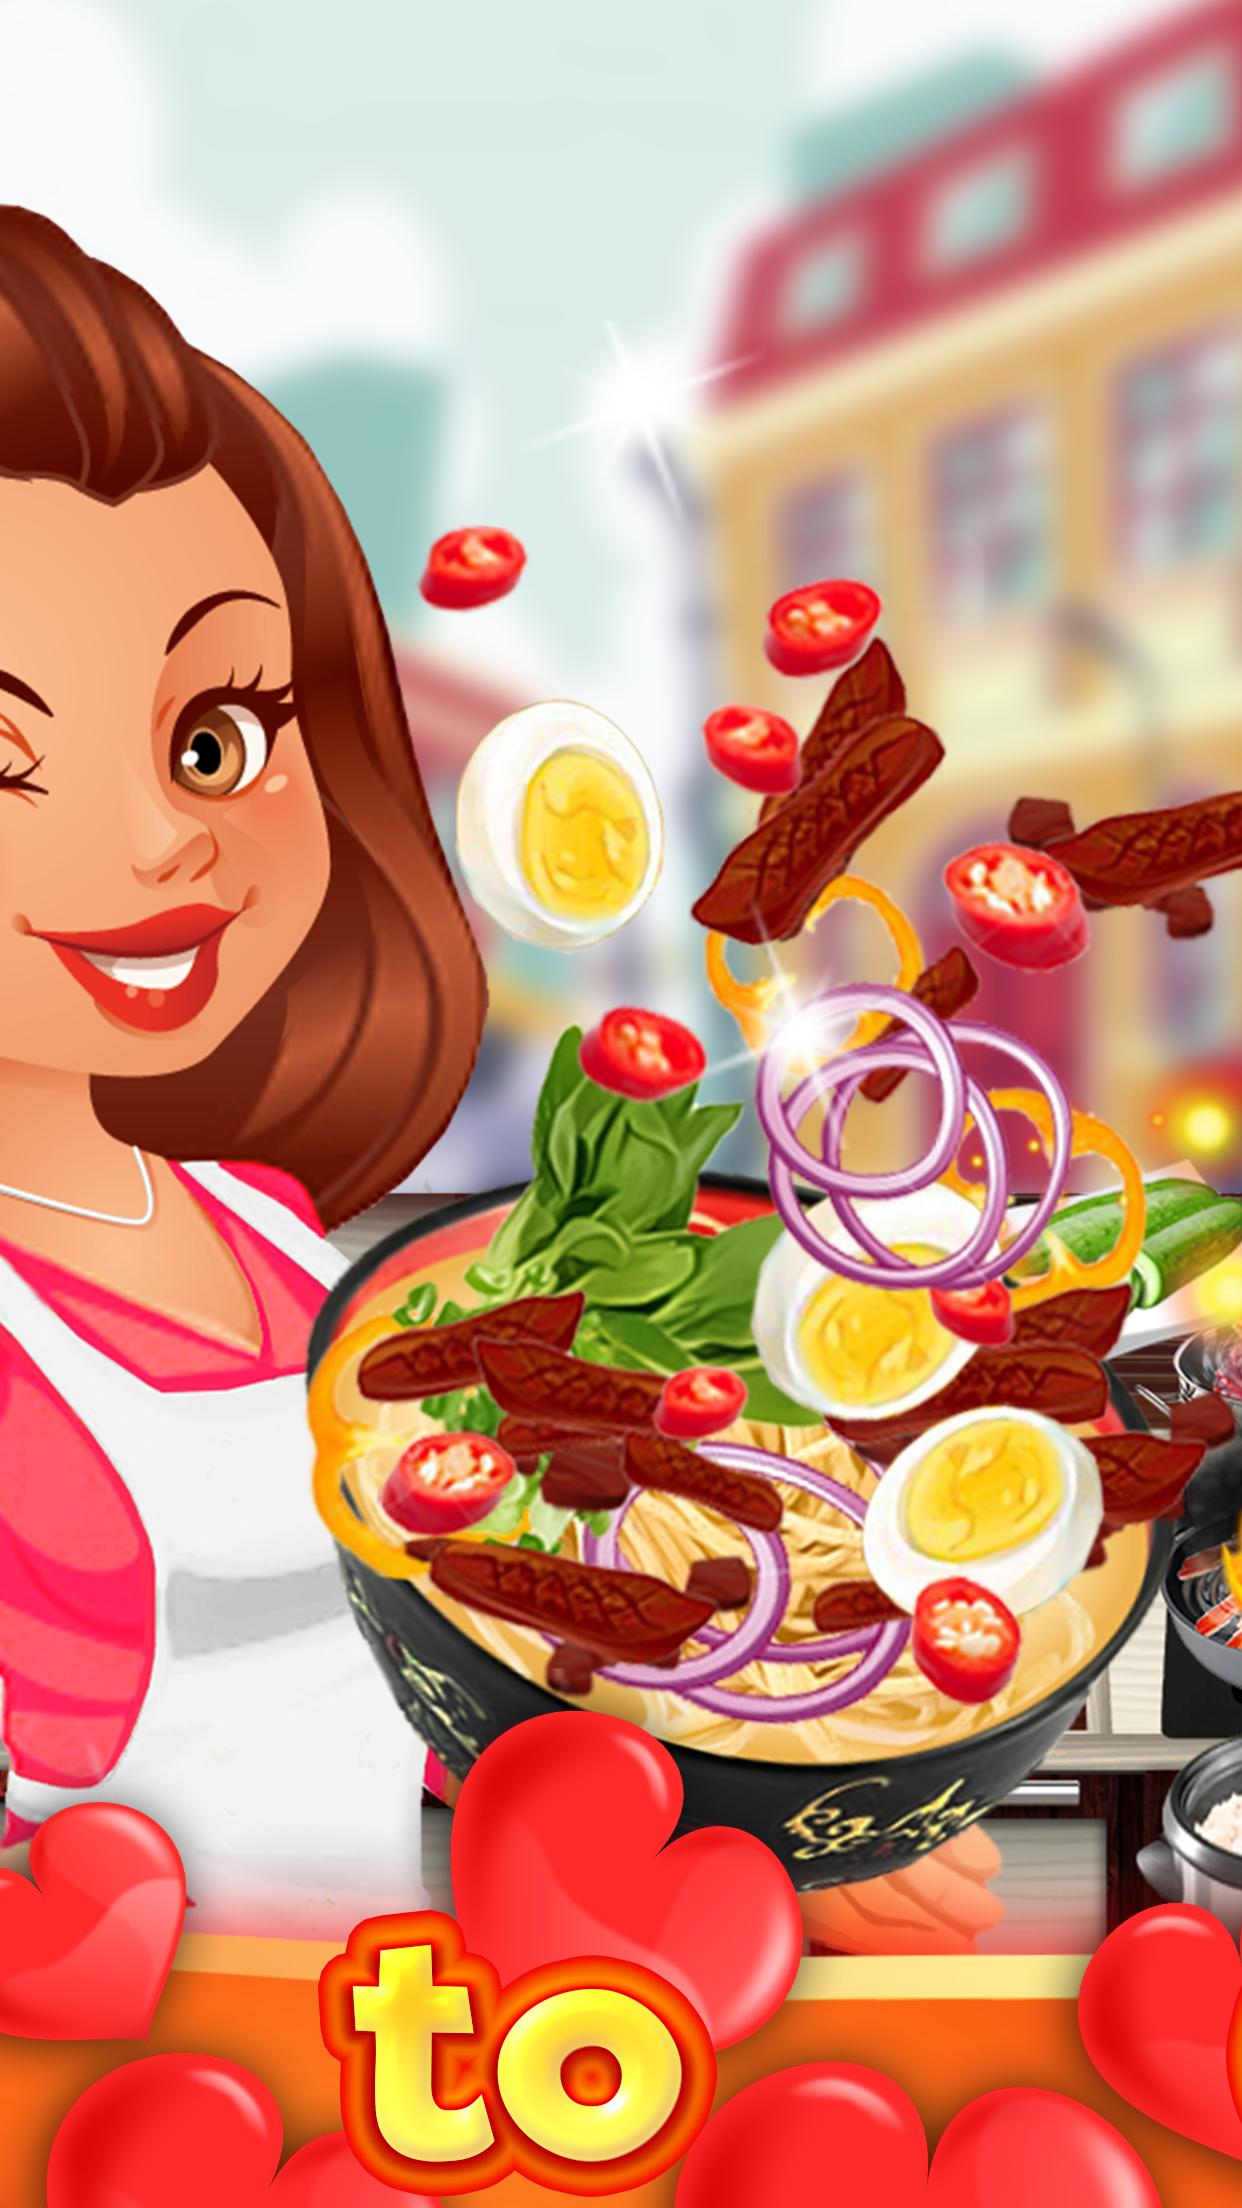 kitchen cooking games download